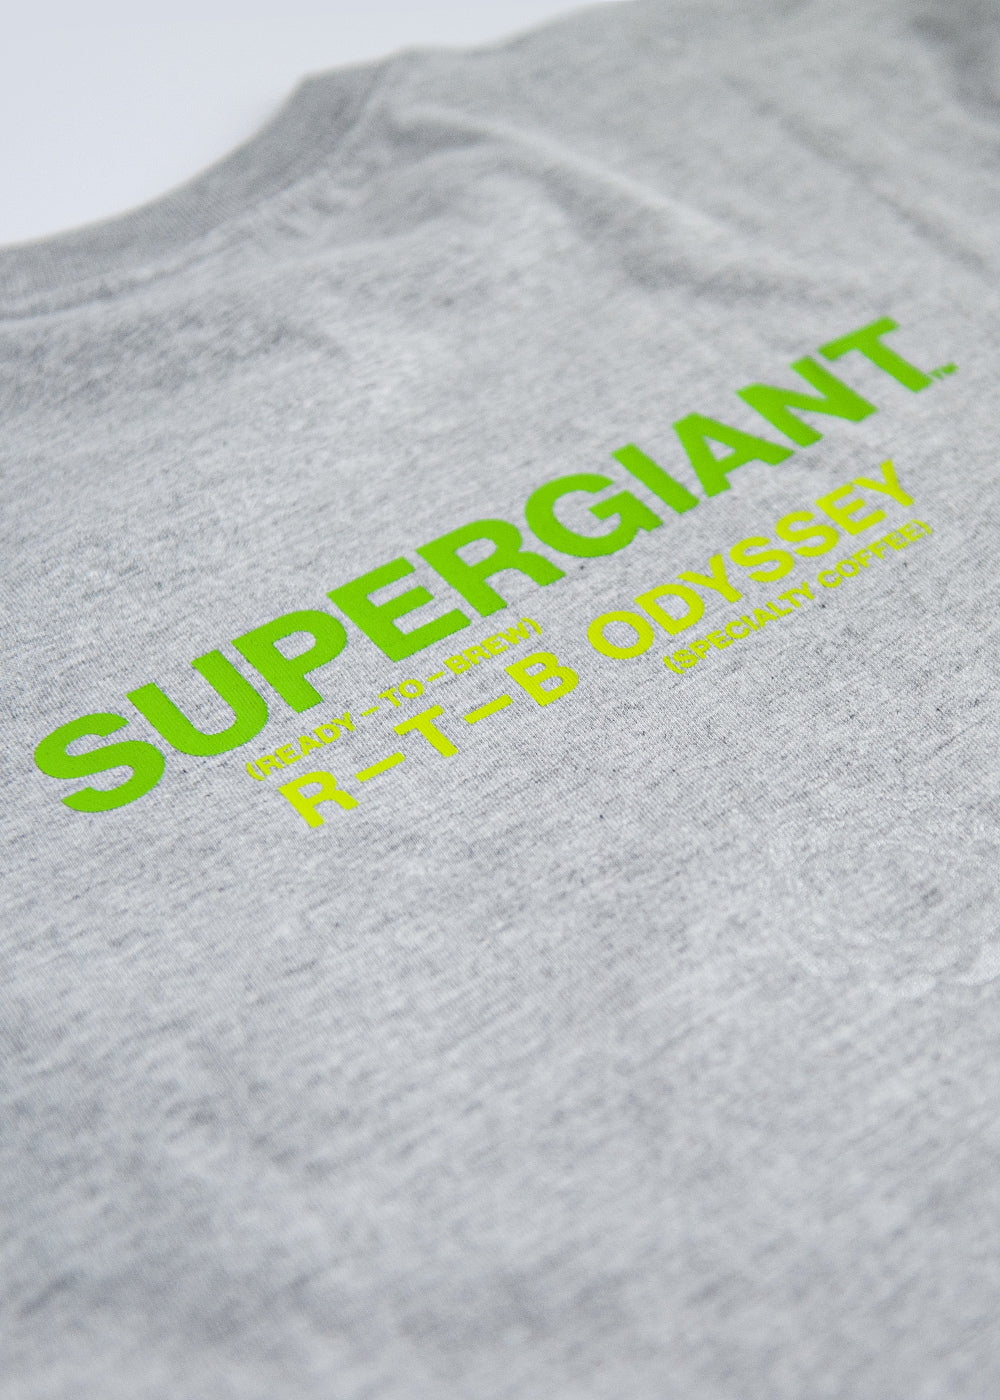 SUPERGIANT™ 2ND ODYSSEY T-SHIRT GREY